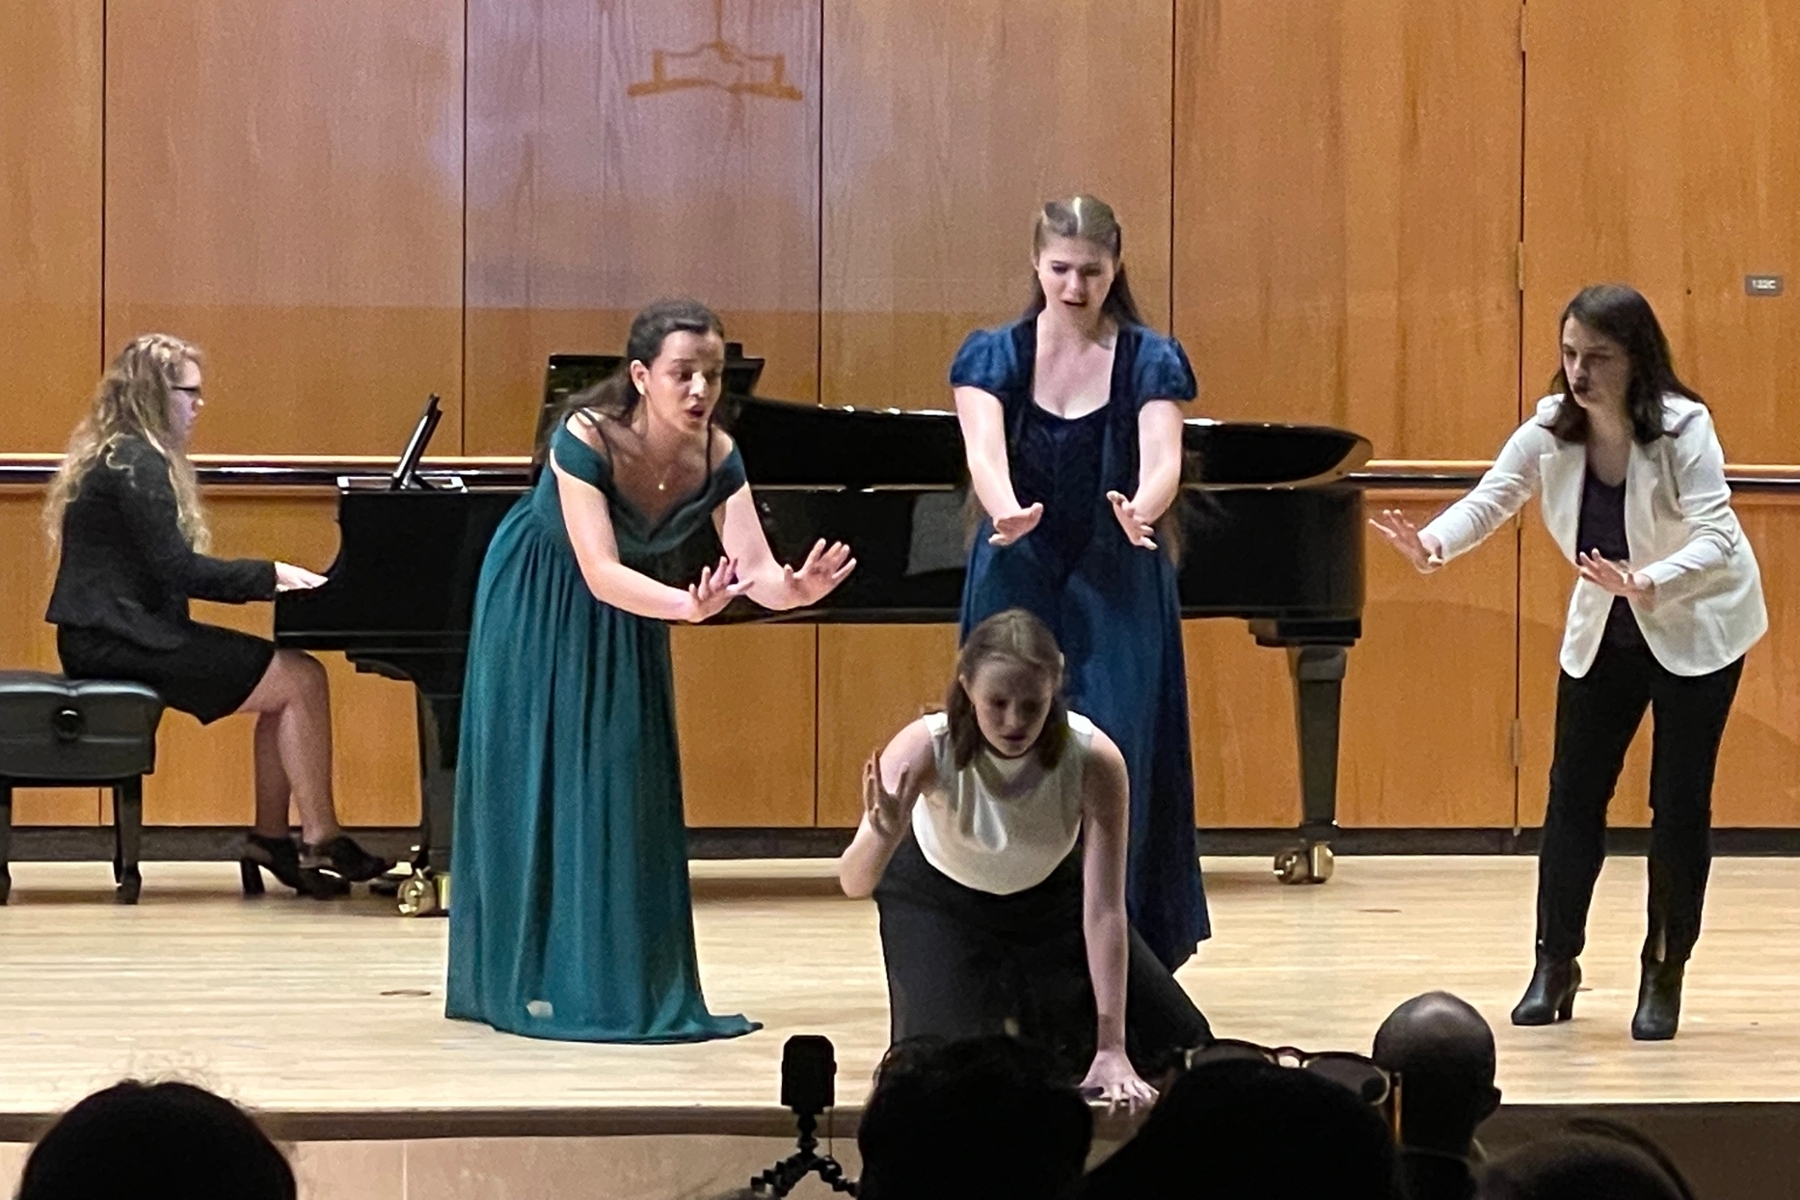 Three singers enacting an operatic scene; gathered around a fourth singer, looking concerned